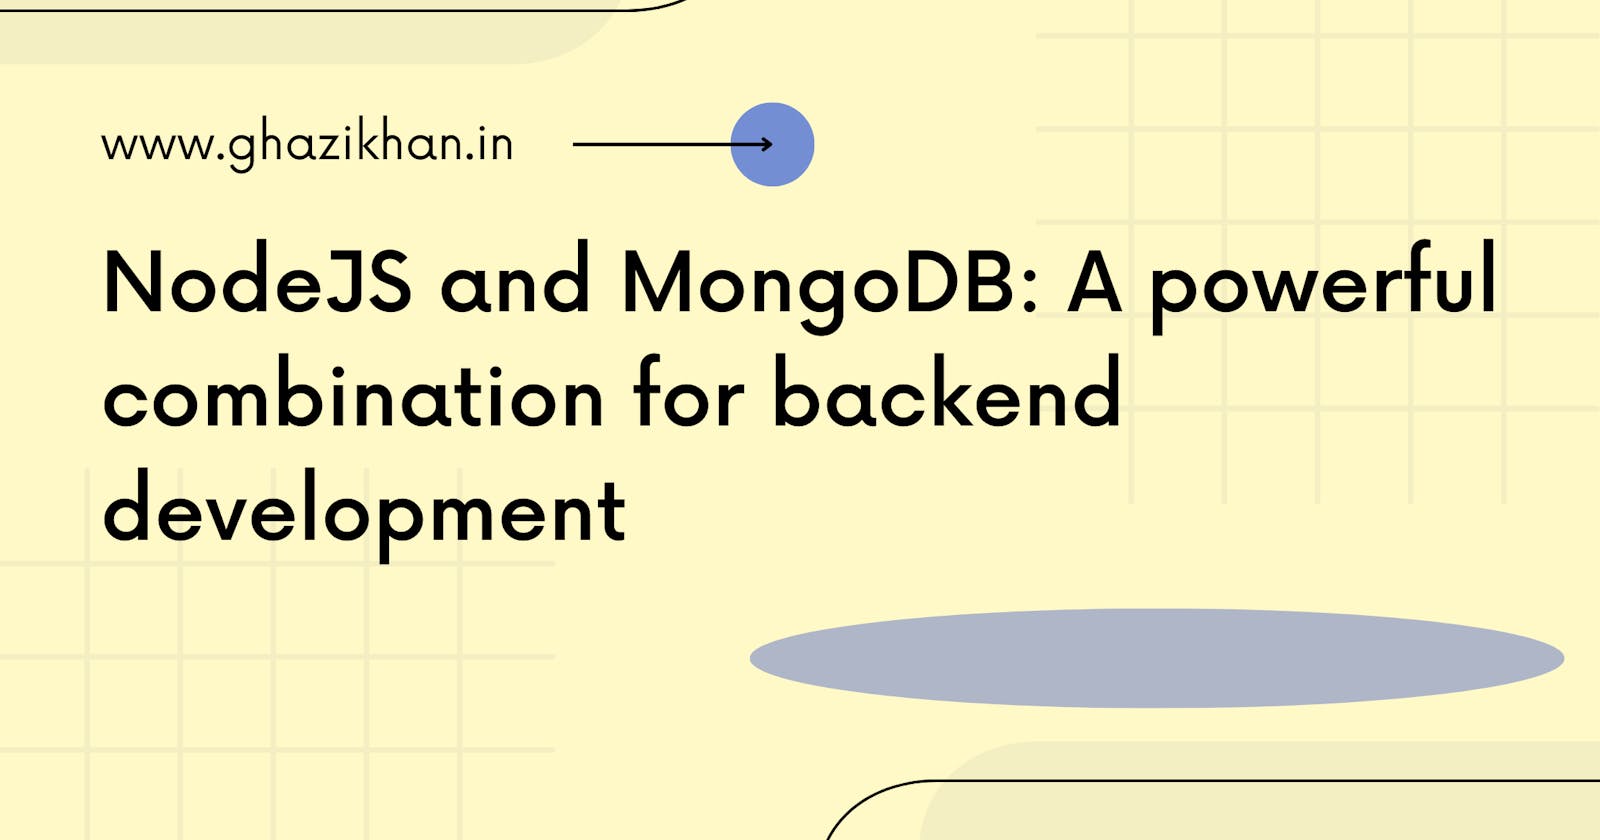 NodeJS and MongoDB: A powerful combination for backend development